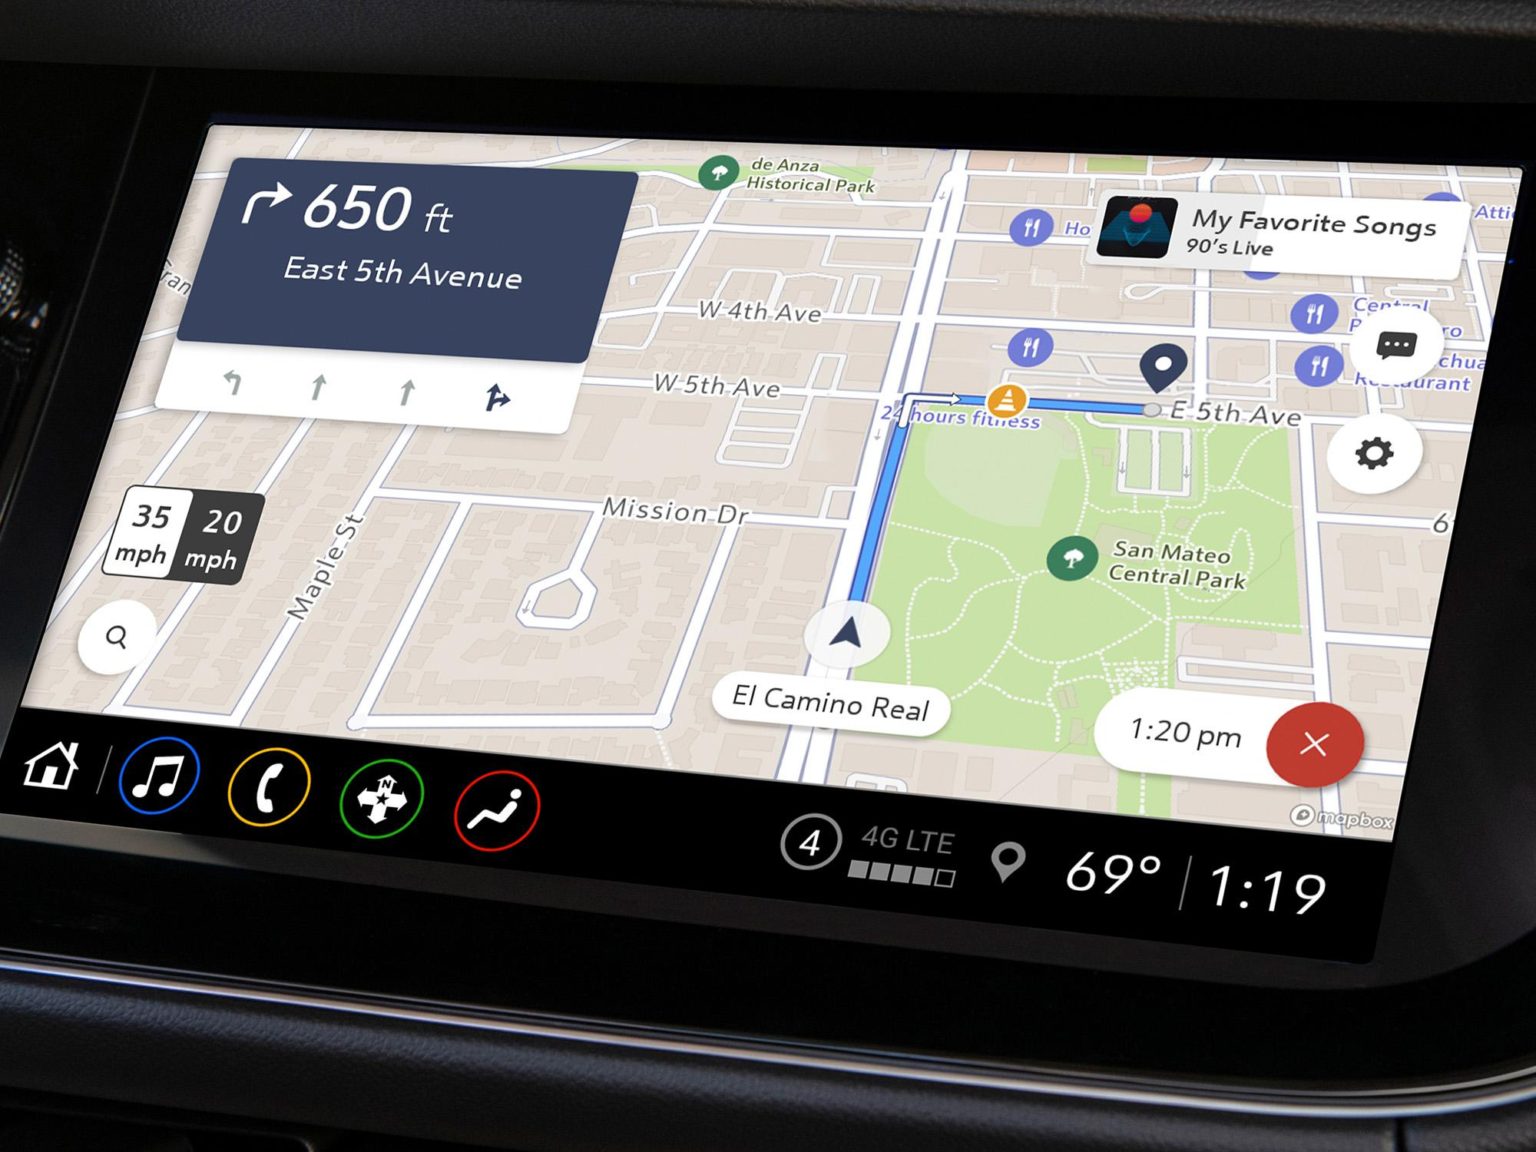 The new Maps+ app will allow drivers to use a navigation system who had not previously purchased navigation.